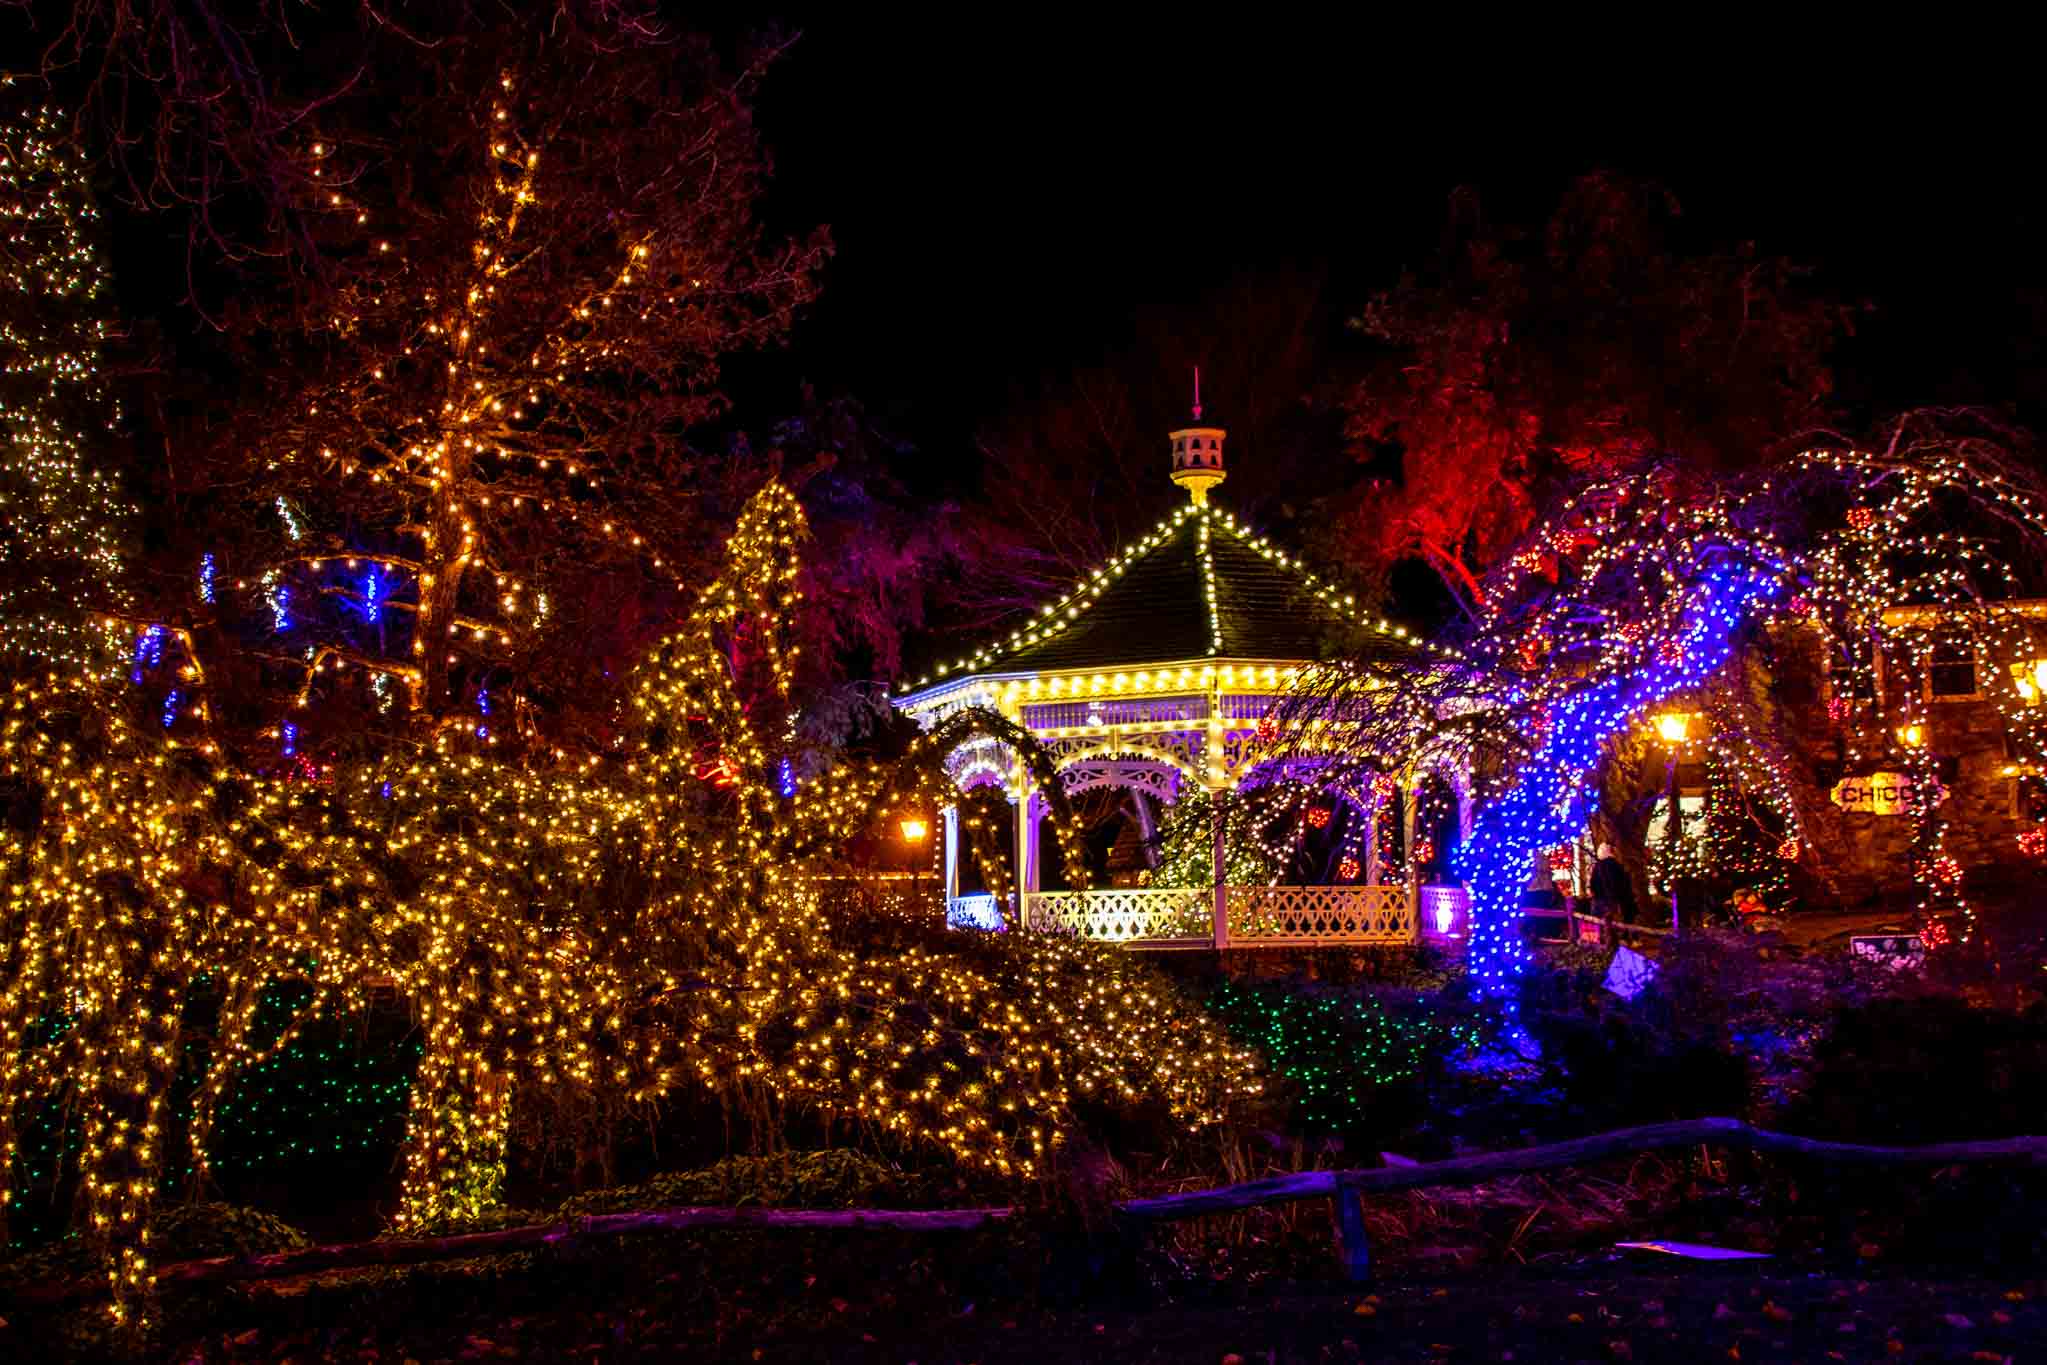 Trees and gazebo lit up with holiday lights at night